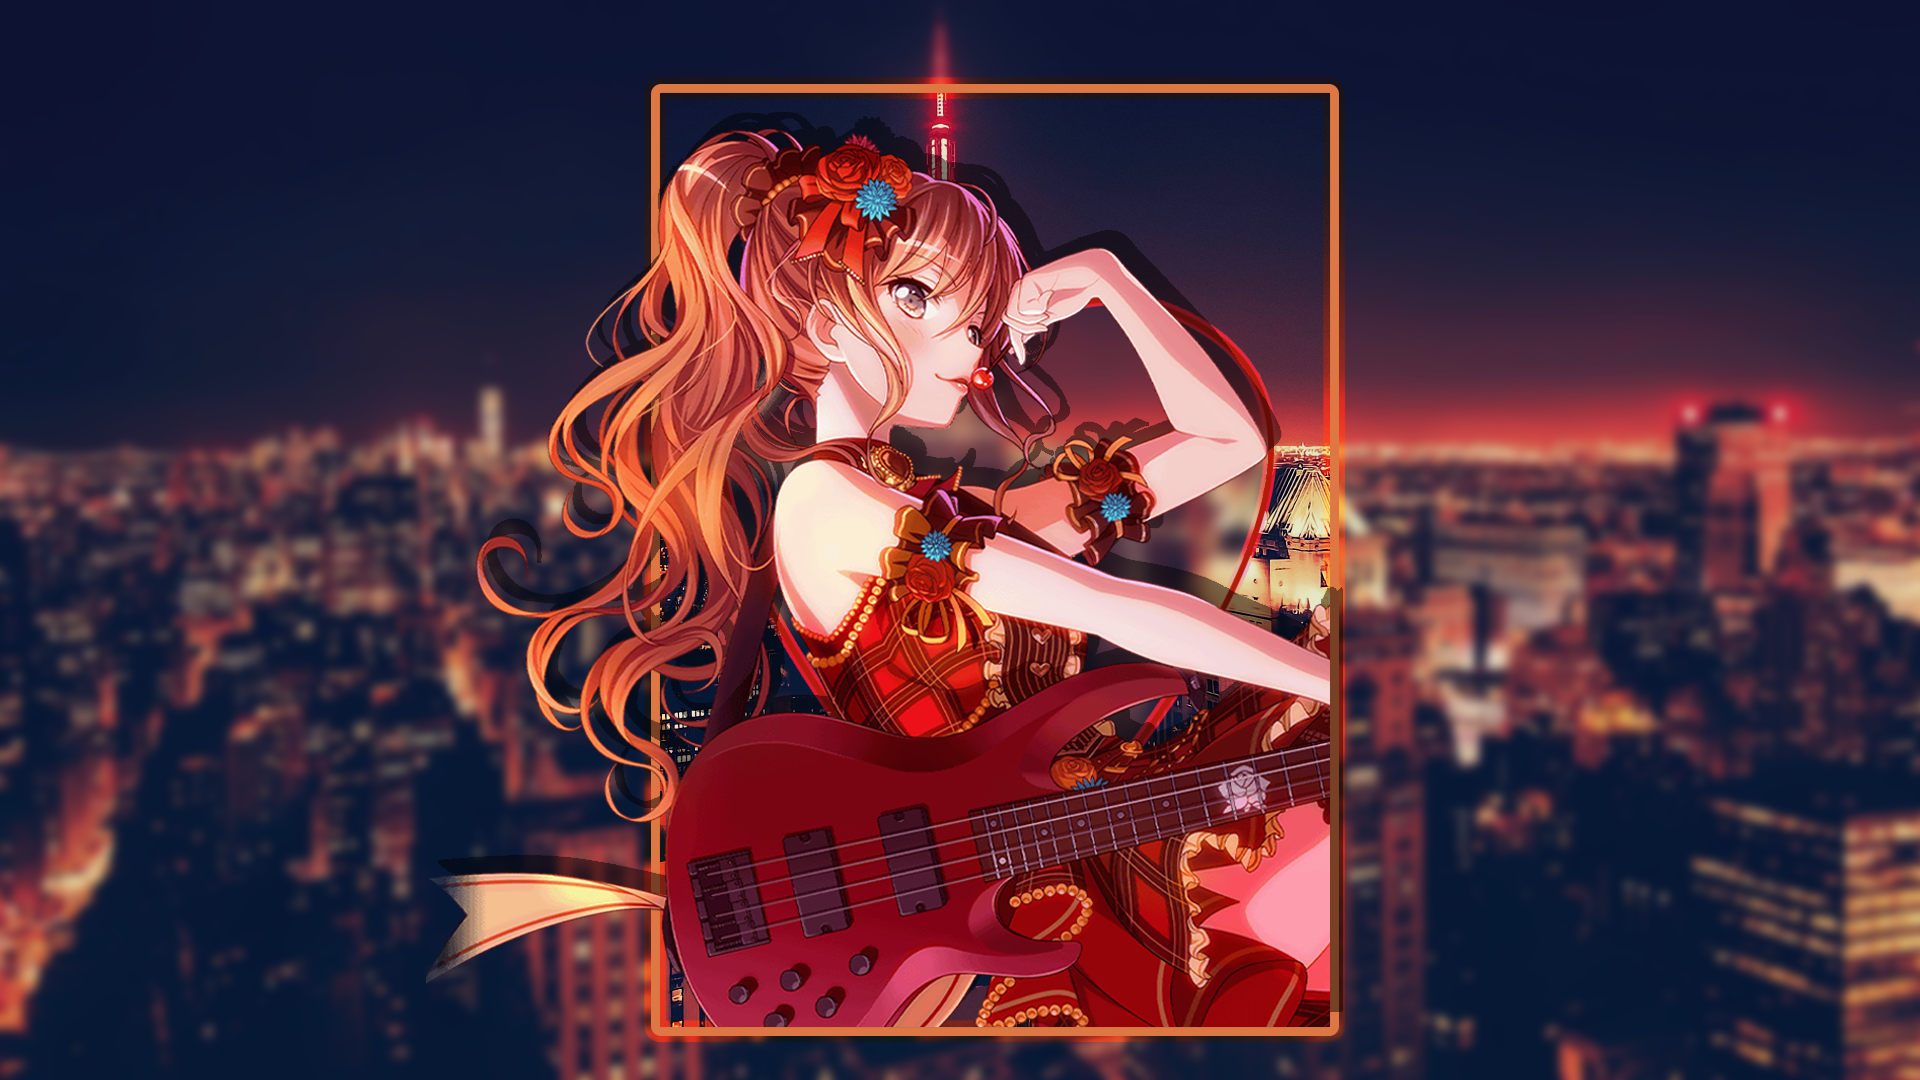 BanG Dream Imai Lisa City Guitar Picture In Picture 1920x1080